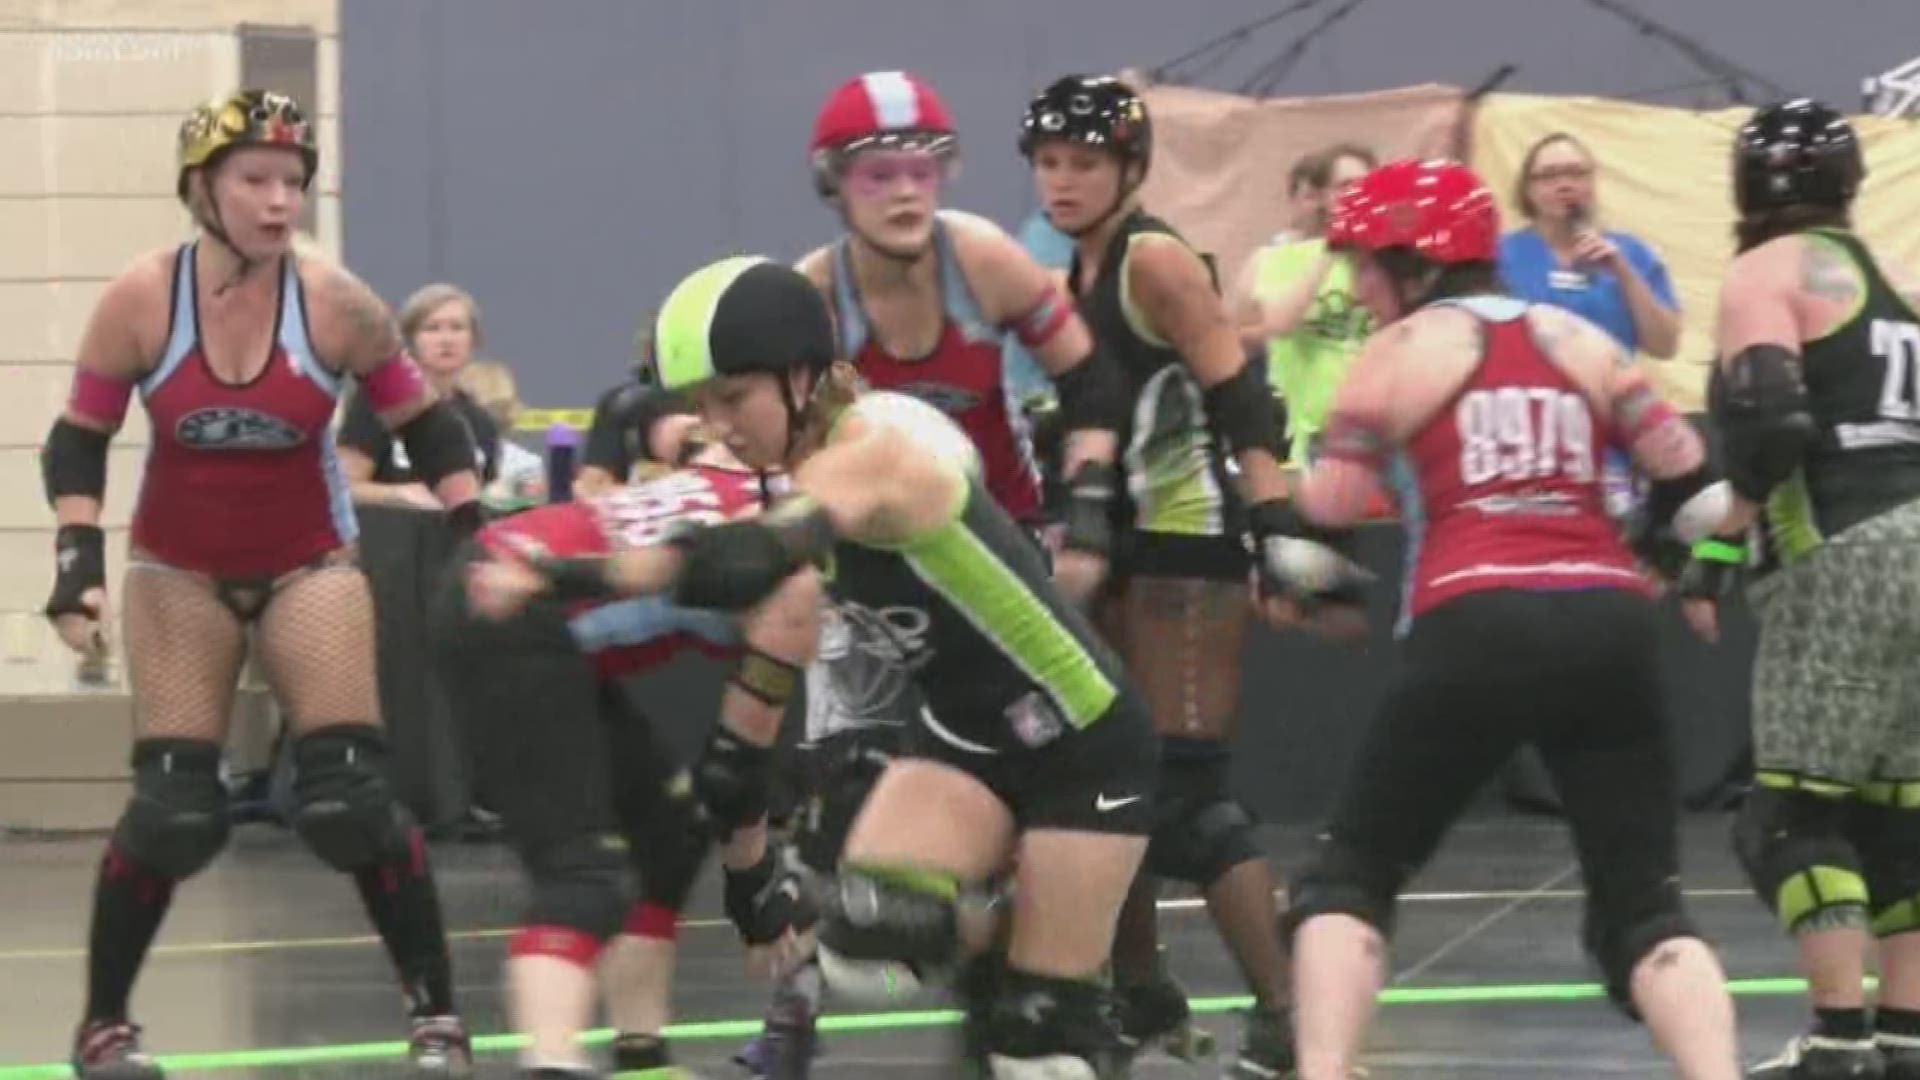 Photojournalist Hunter Joyce takes us to the roller derby.